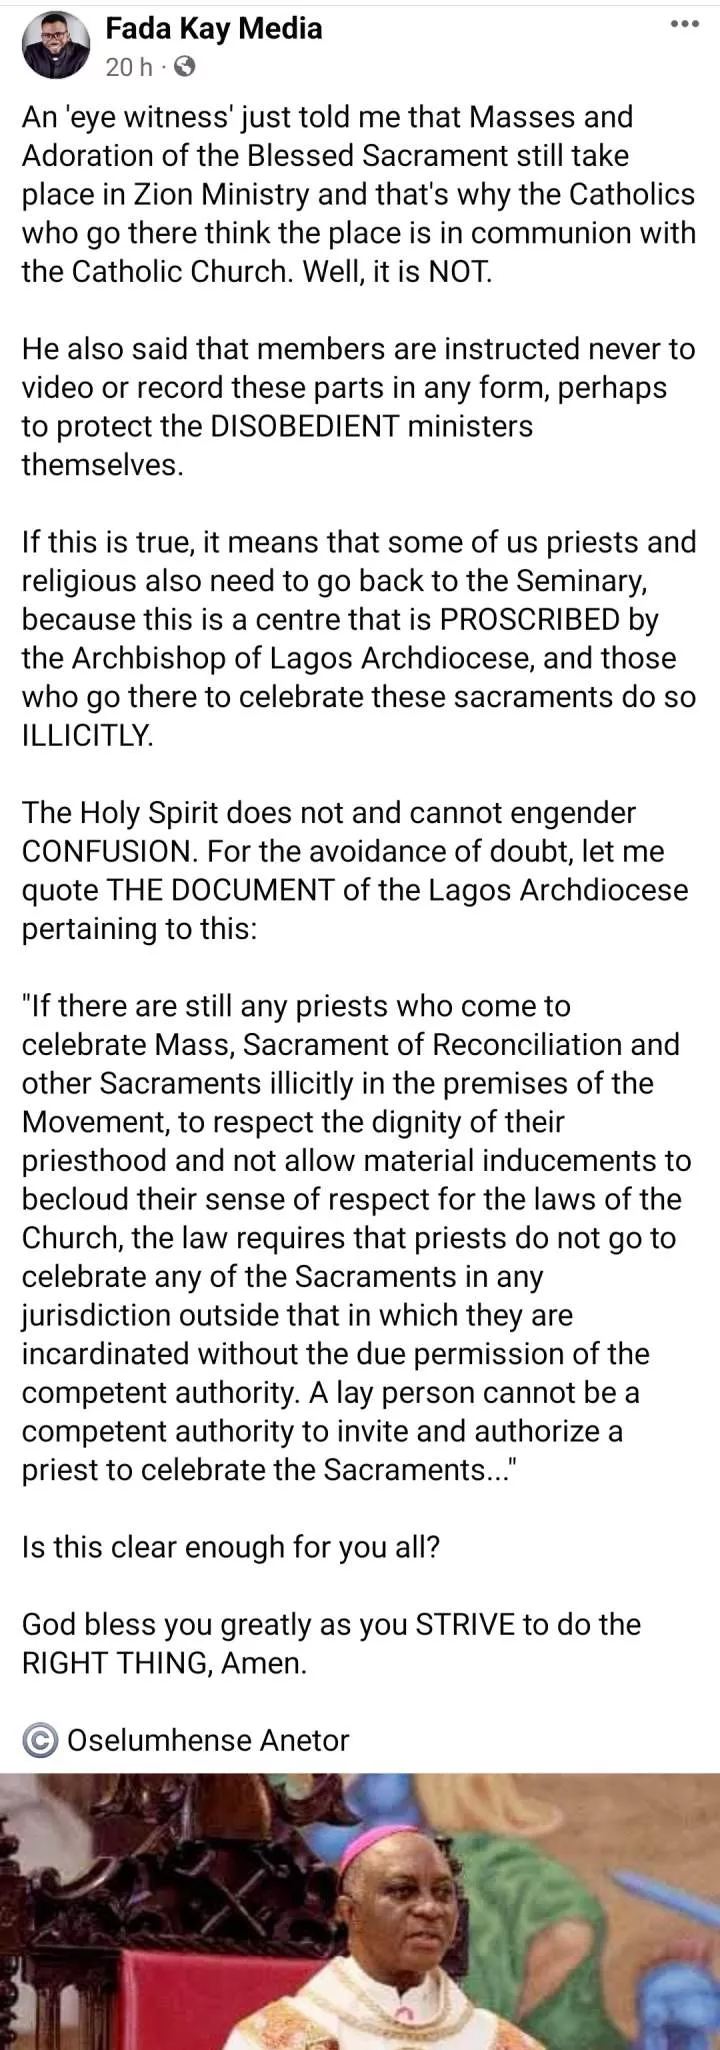 'This centre is proscribed by the Archbishop of Lagos Archdiocese